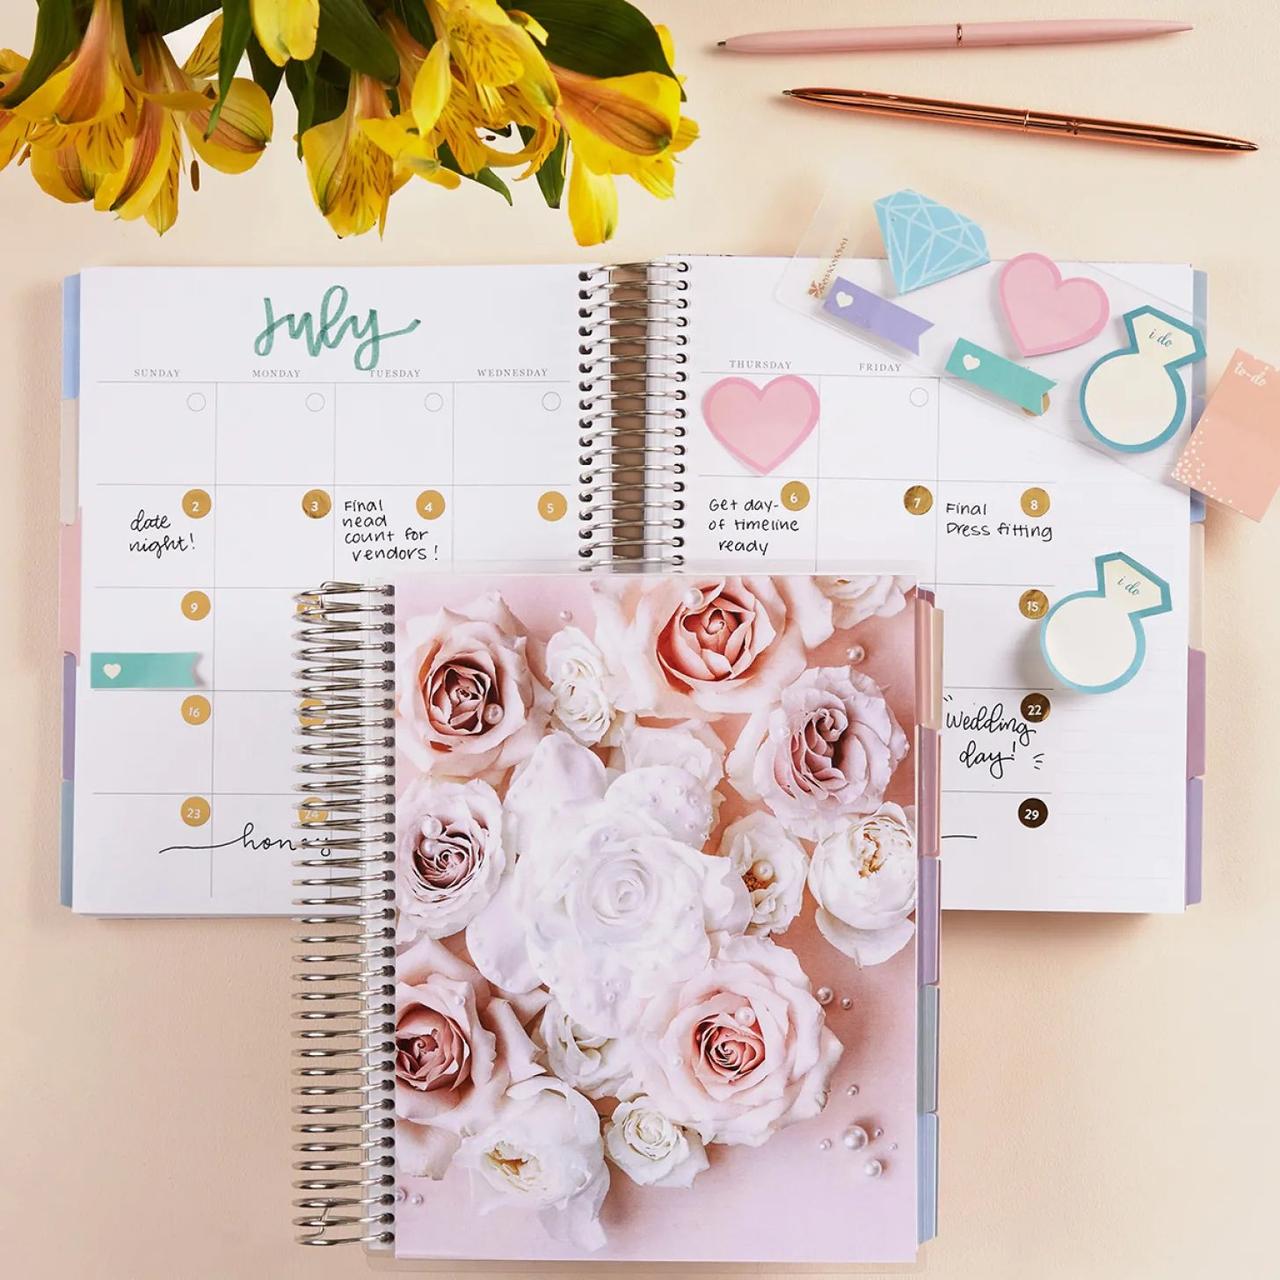 The 15 Best Wedding Planner Books in 2023 - Personalized Wedding Planner  Books